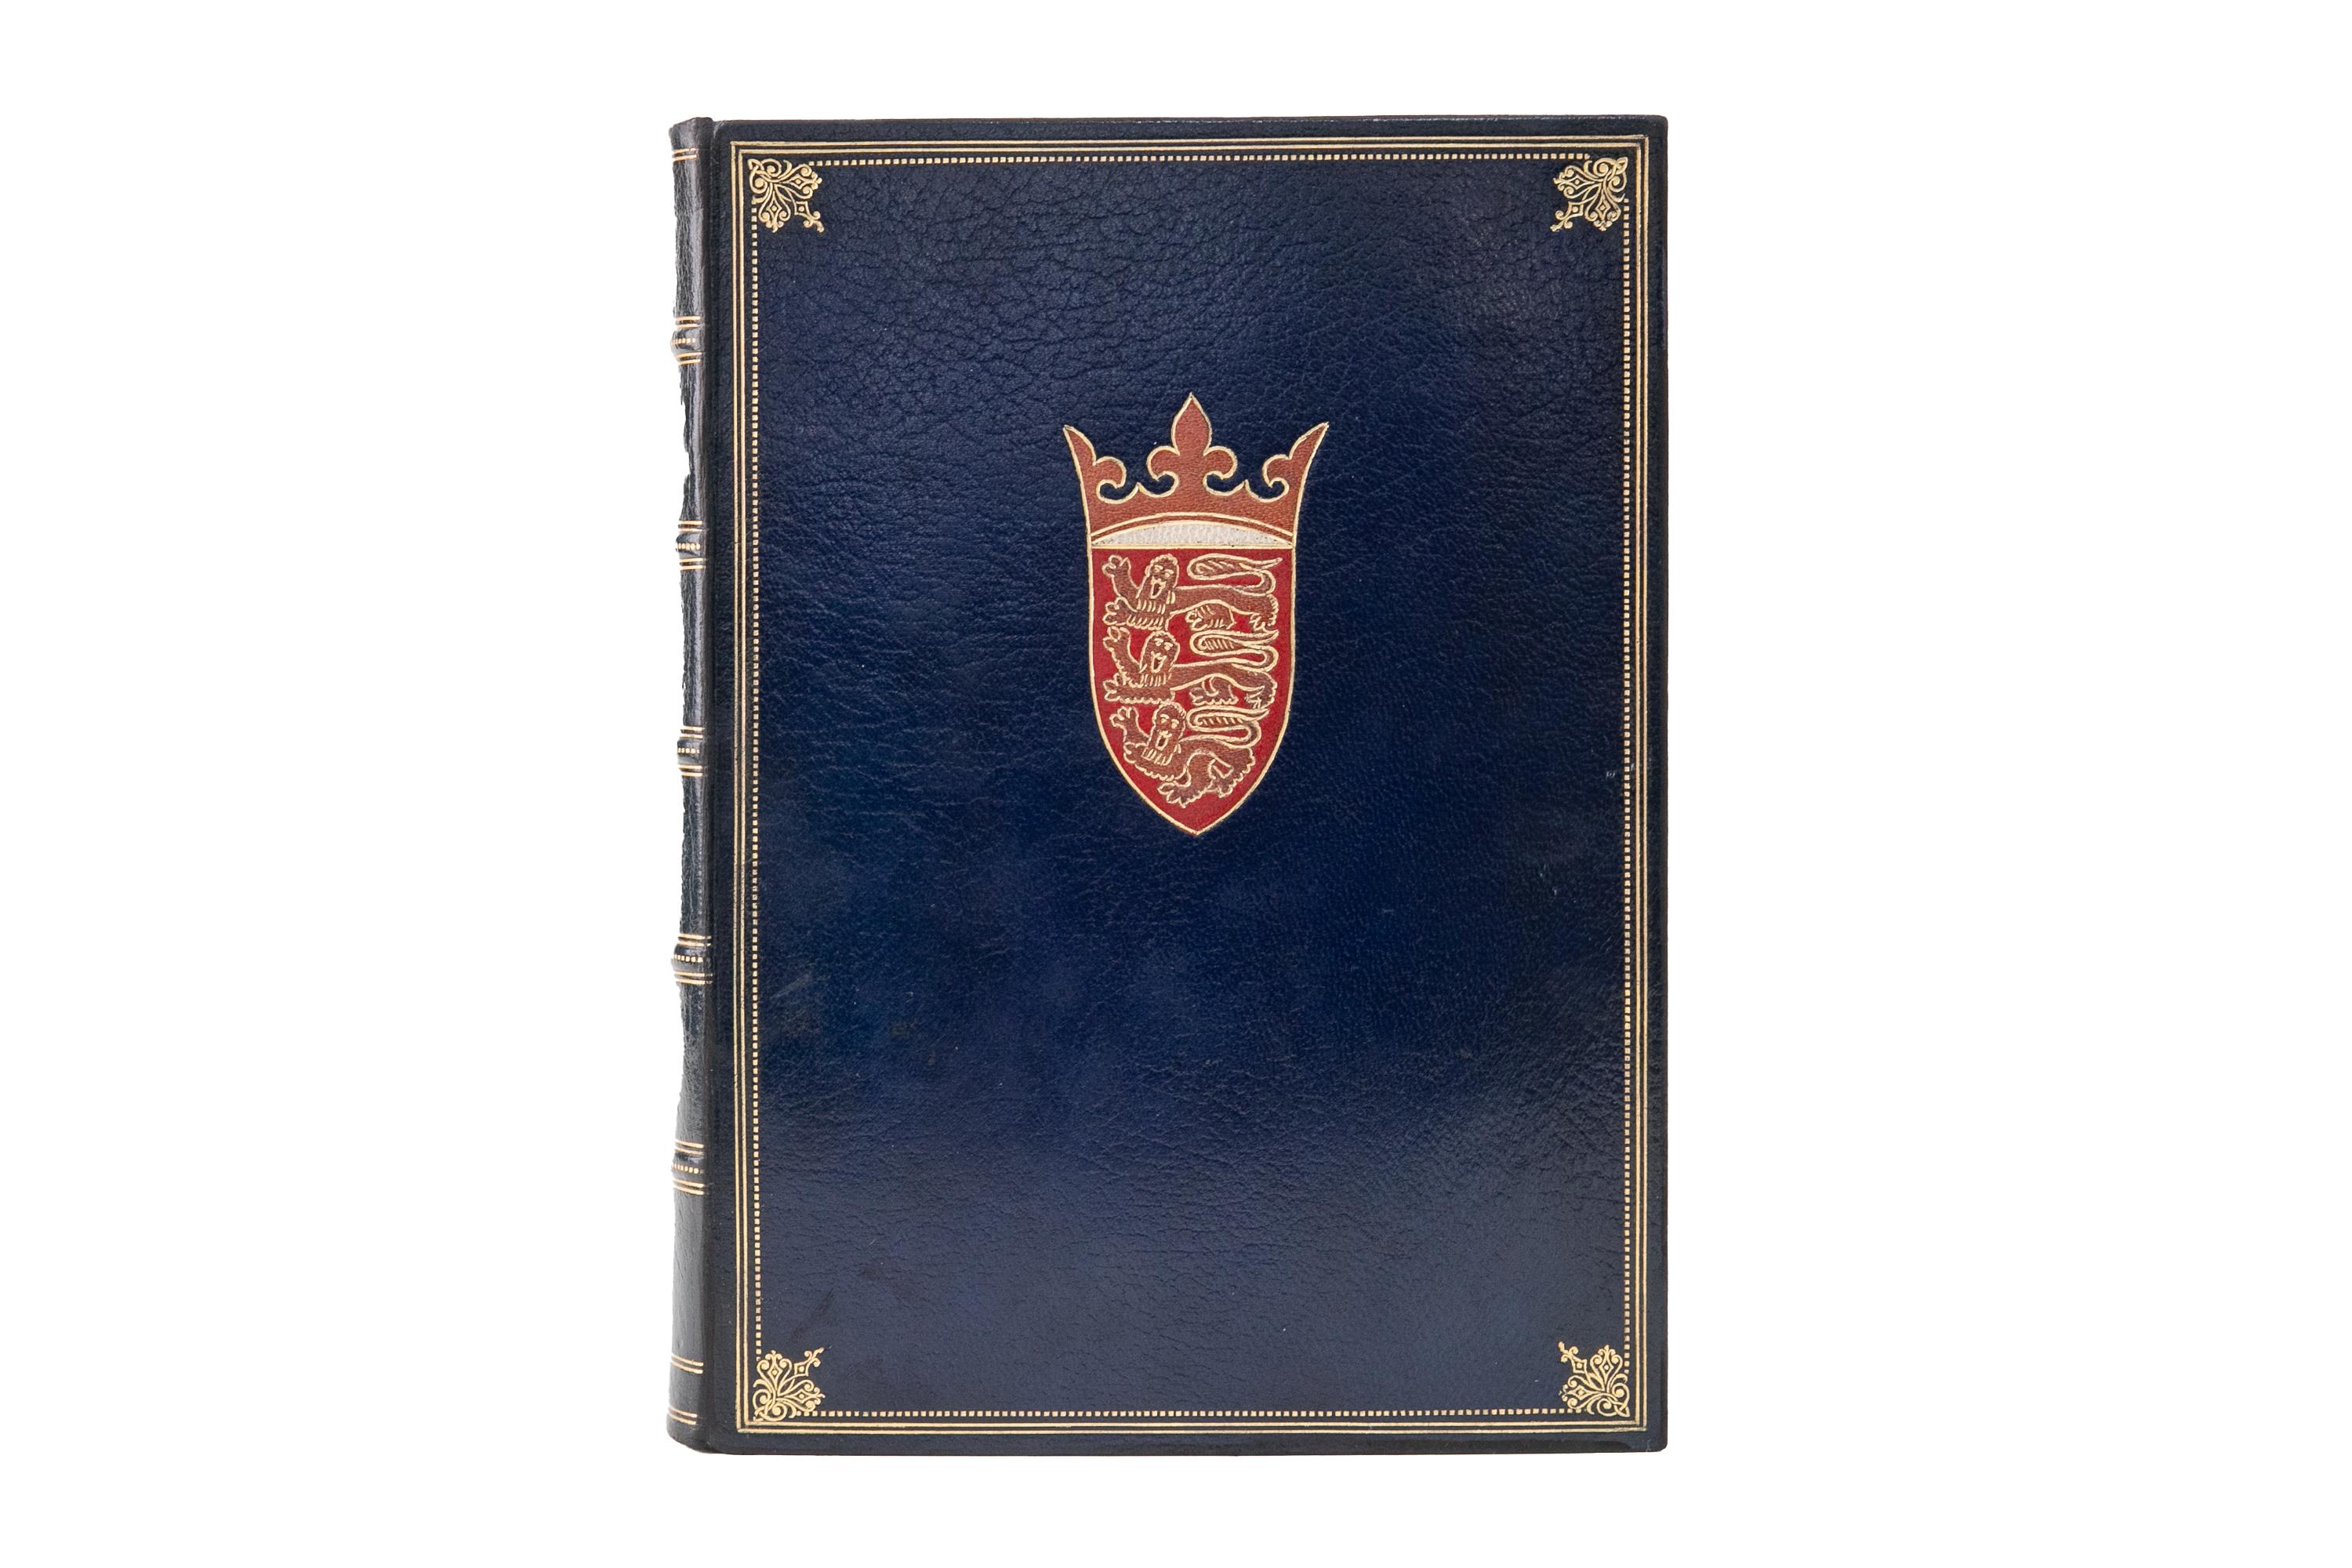 8 Volumes. Jean Froissart, Froissart's Chronicles. Limited Leather Private Press. Bound in full crushed blue morocco, raised bands, gilt ruled and tooled spine and boards, 14th century Royal Arms Of England inlaid on front boards, top edges gilt,